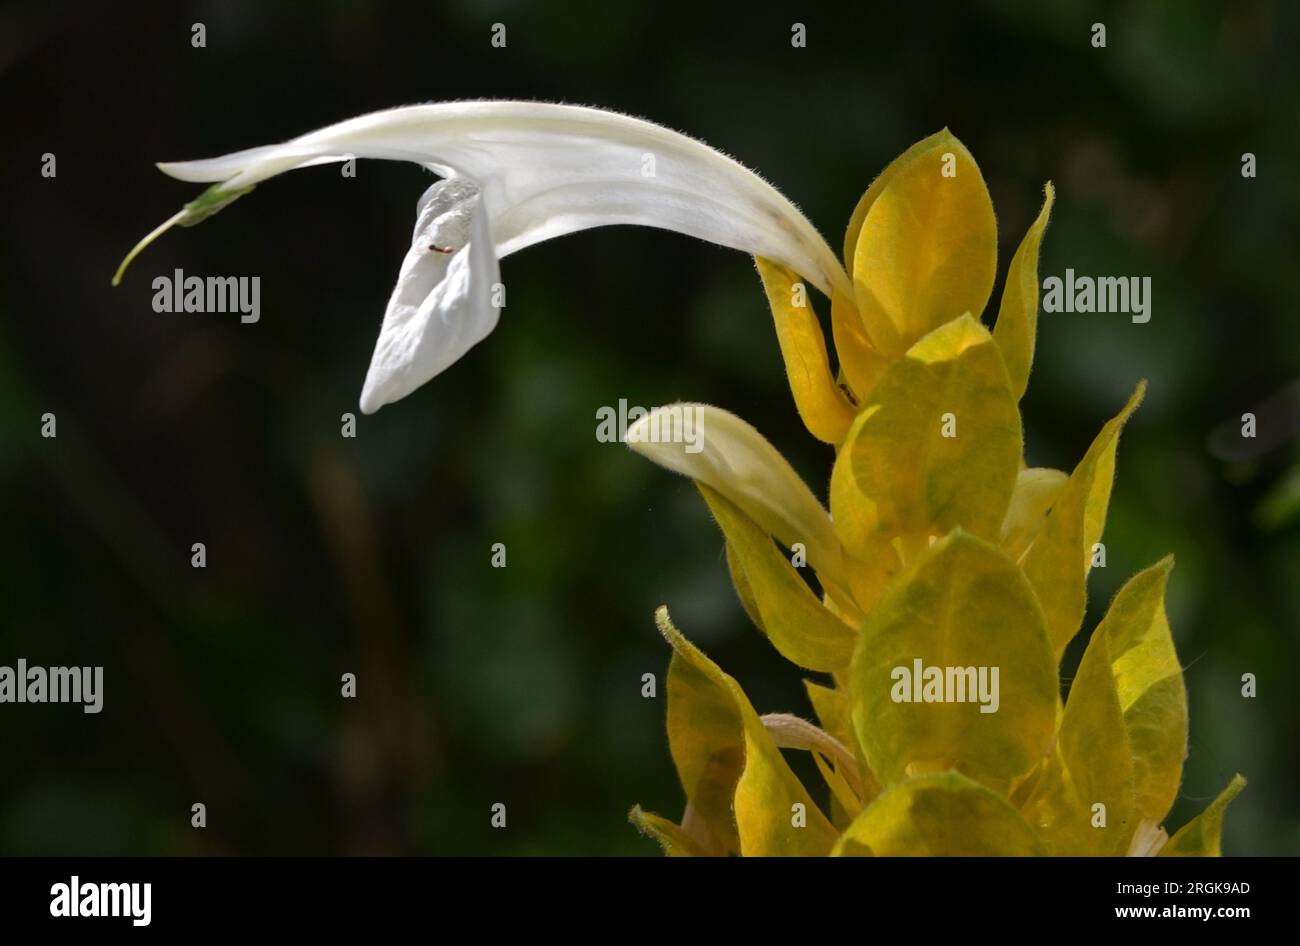 Blank yellow shrimp flower detail.Pachystachys lutea known in Brazil as “shrimp”, is a tropical perennial shrub native to South America. T Stock Photo